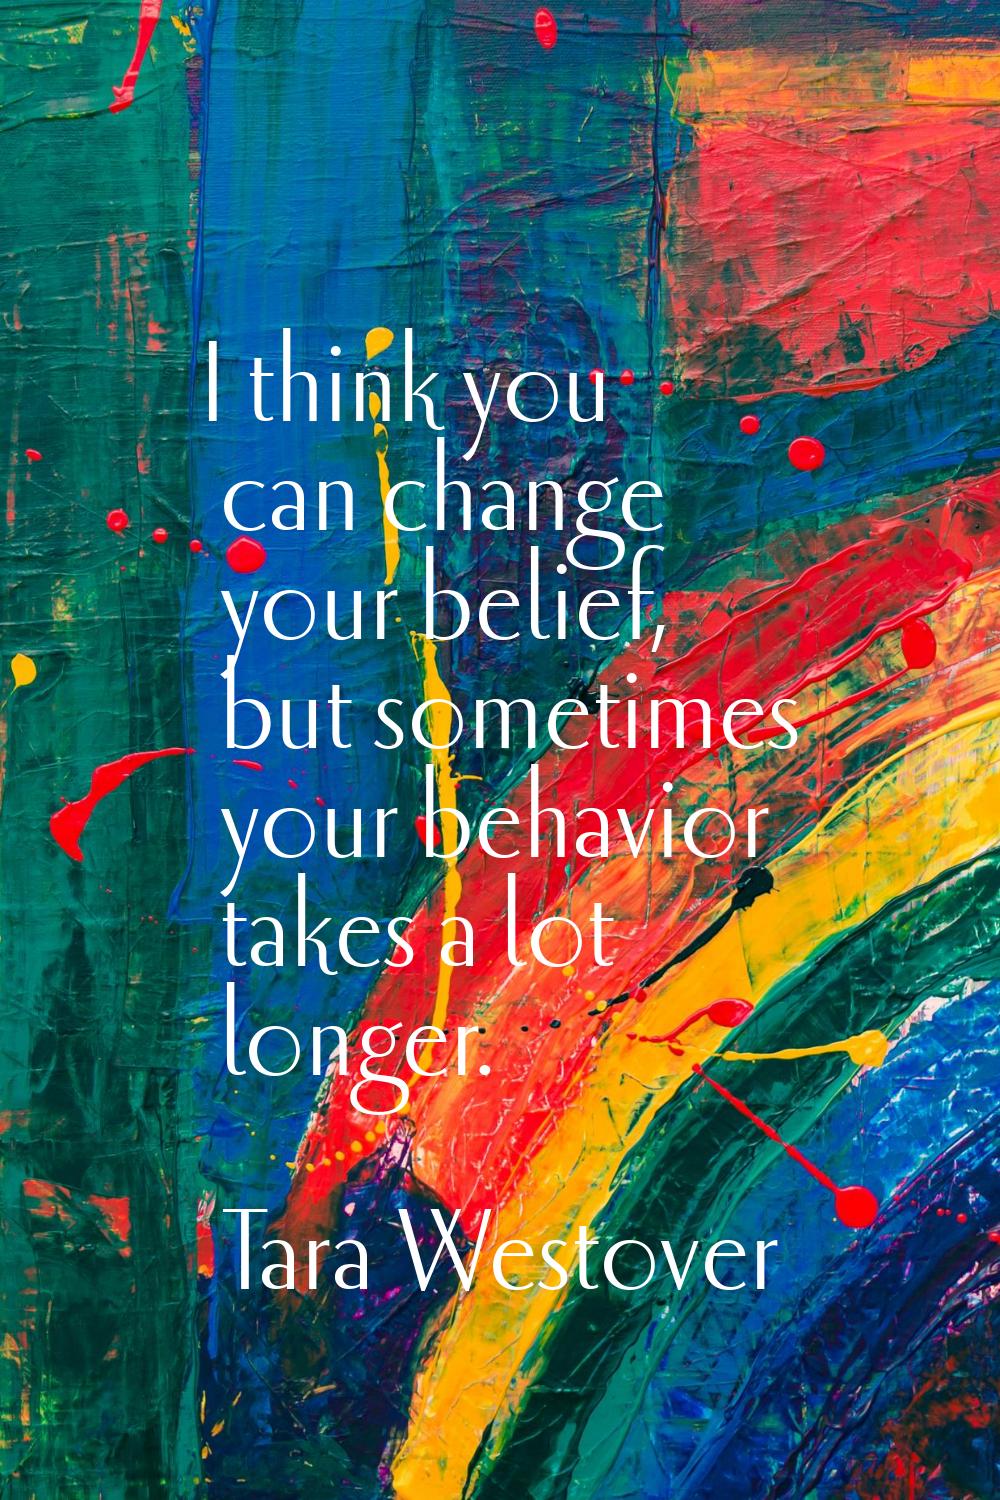 I think you can change your belief, but sometimes your behavior takes a lot longer.